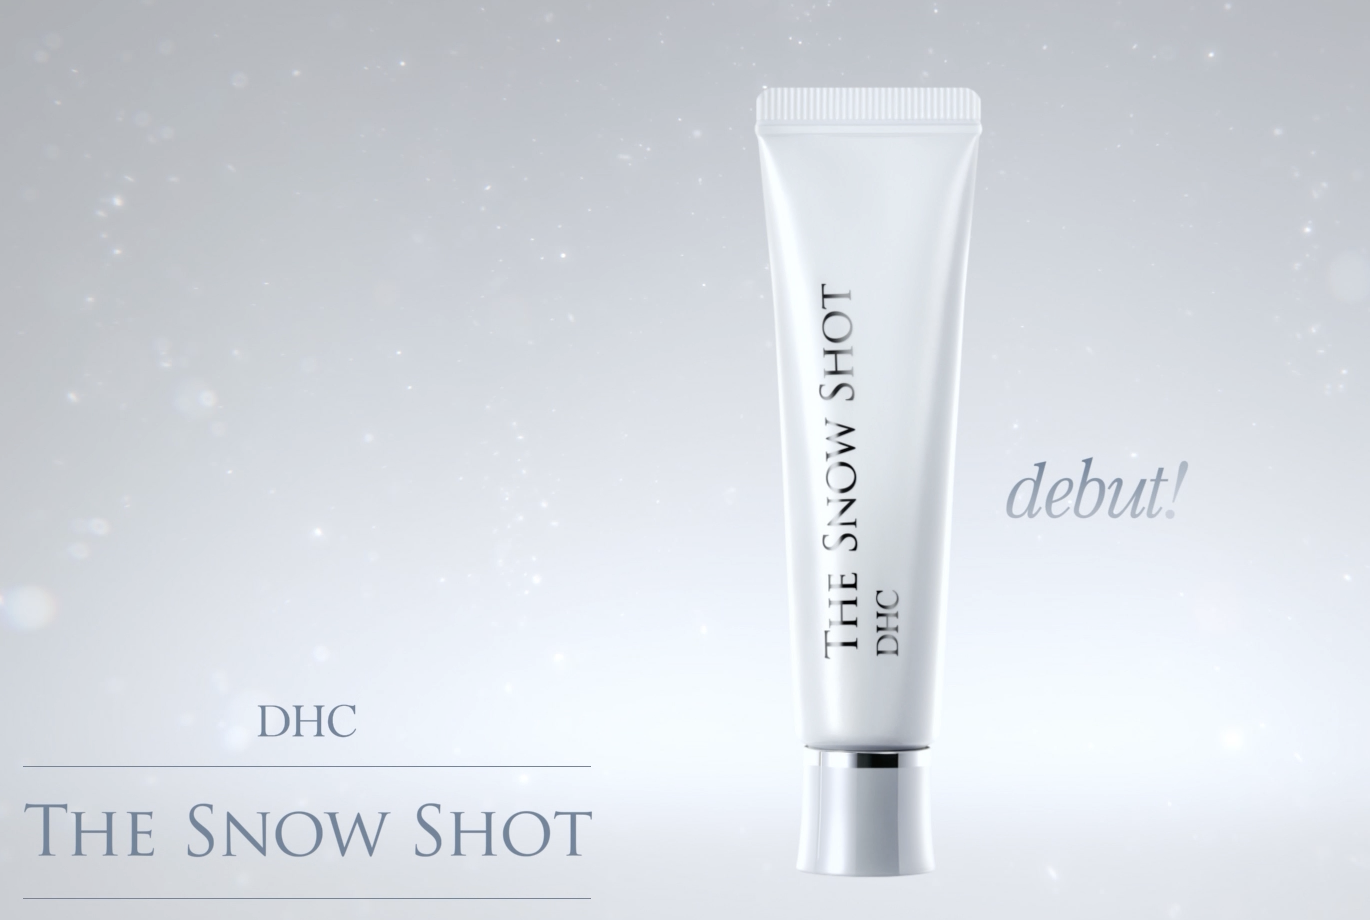 DHC THE SNOW SHOT